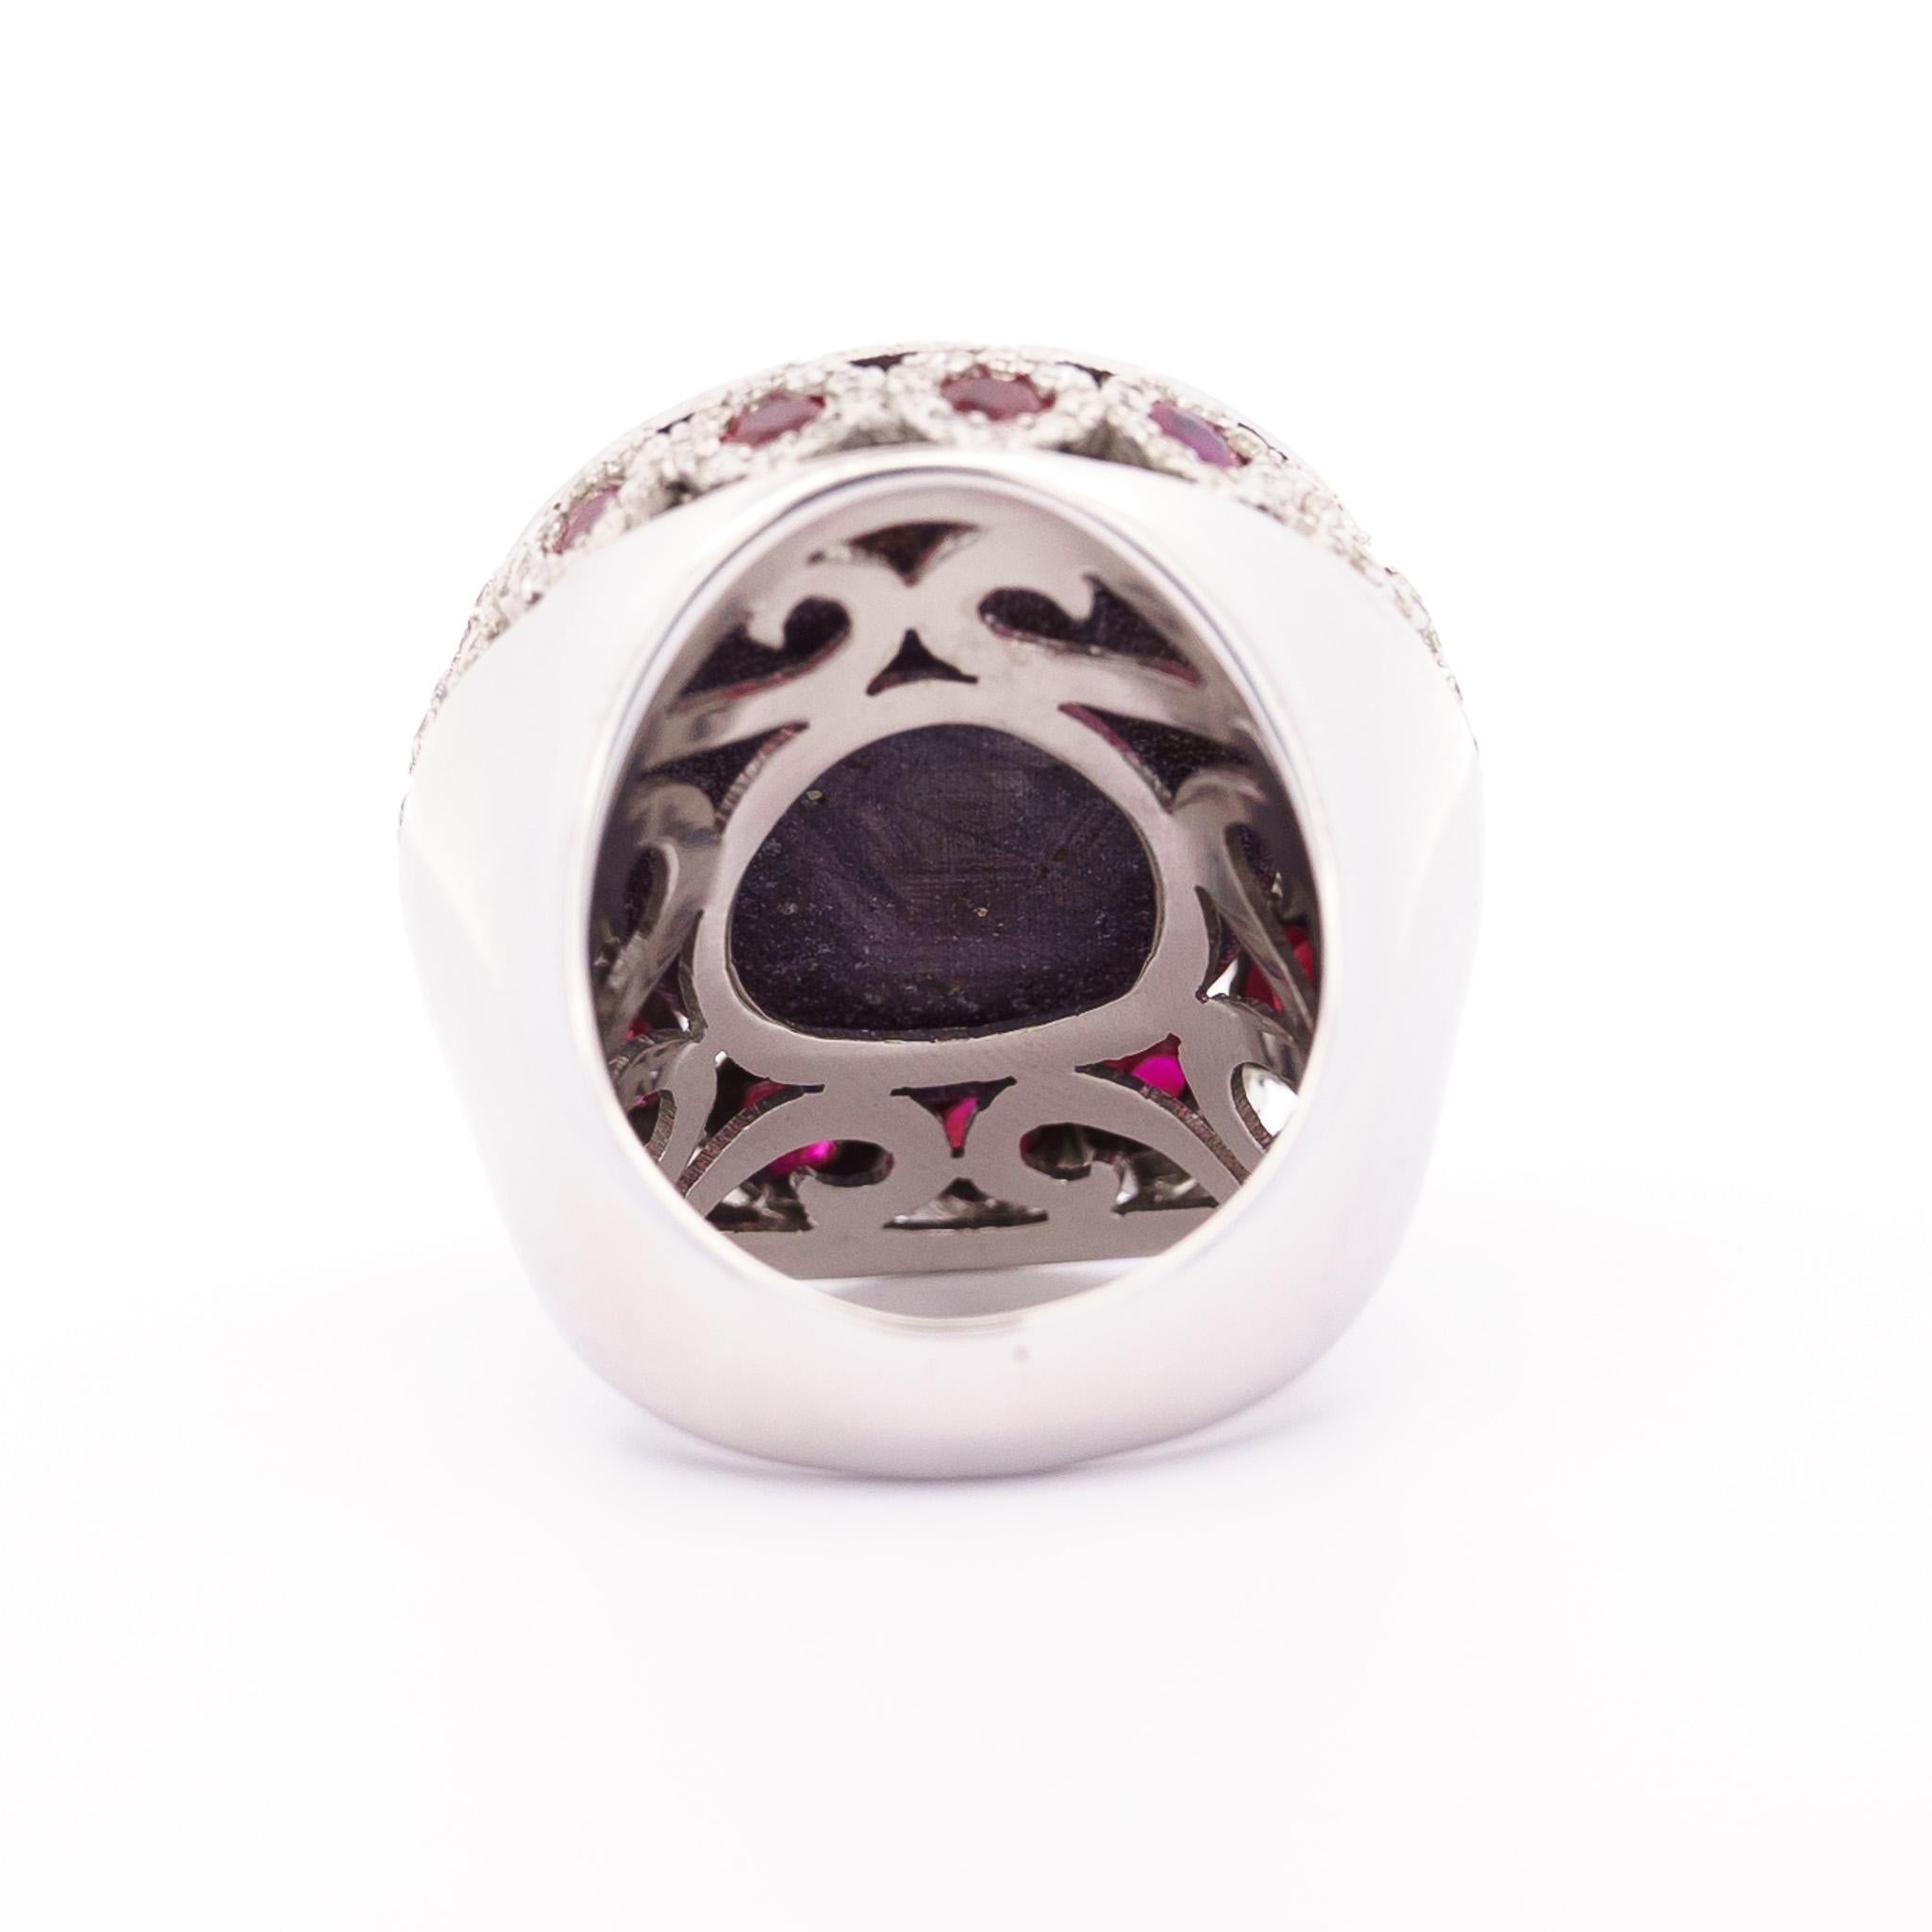 Vintage 50 Carat Star Ruby Cabochon 18K White Gold Gypsy Style Heavy Ring In New Condition For Sale In Miami, FL